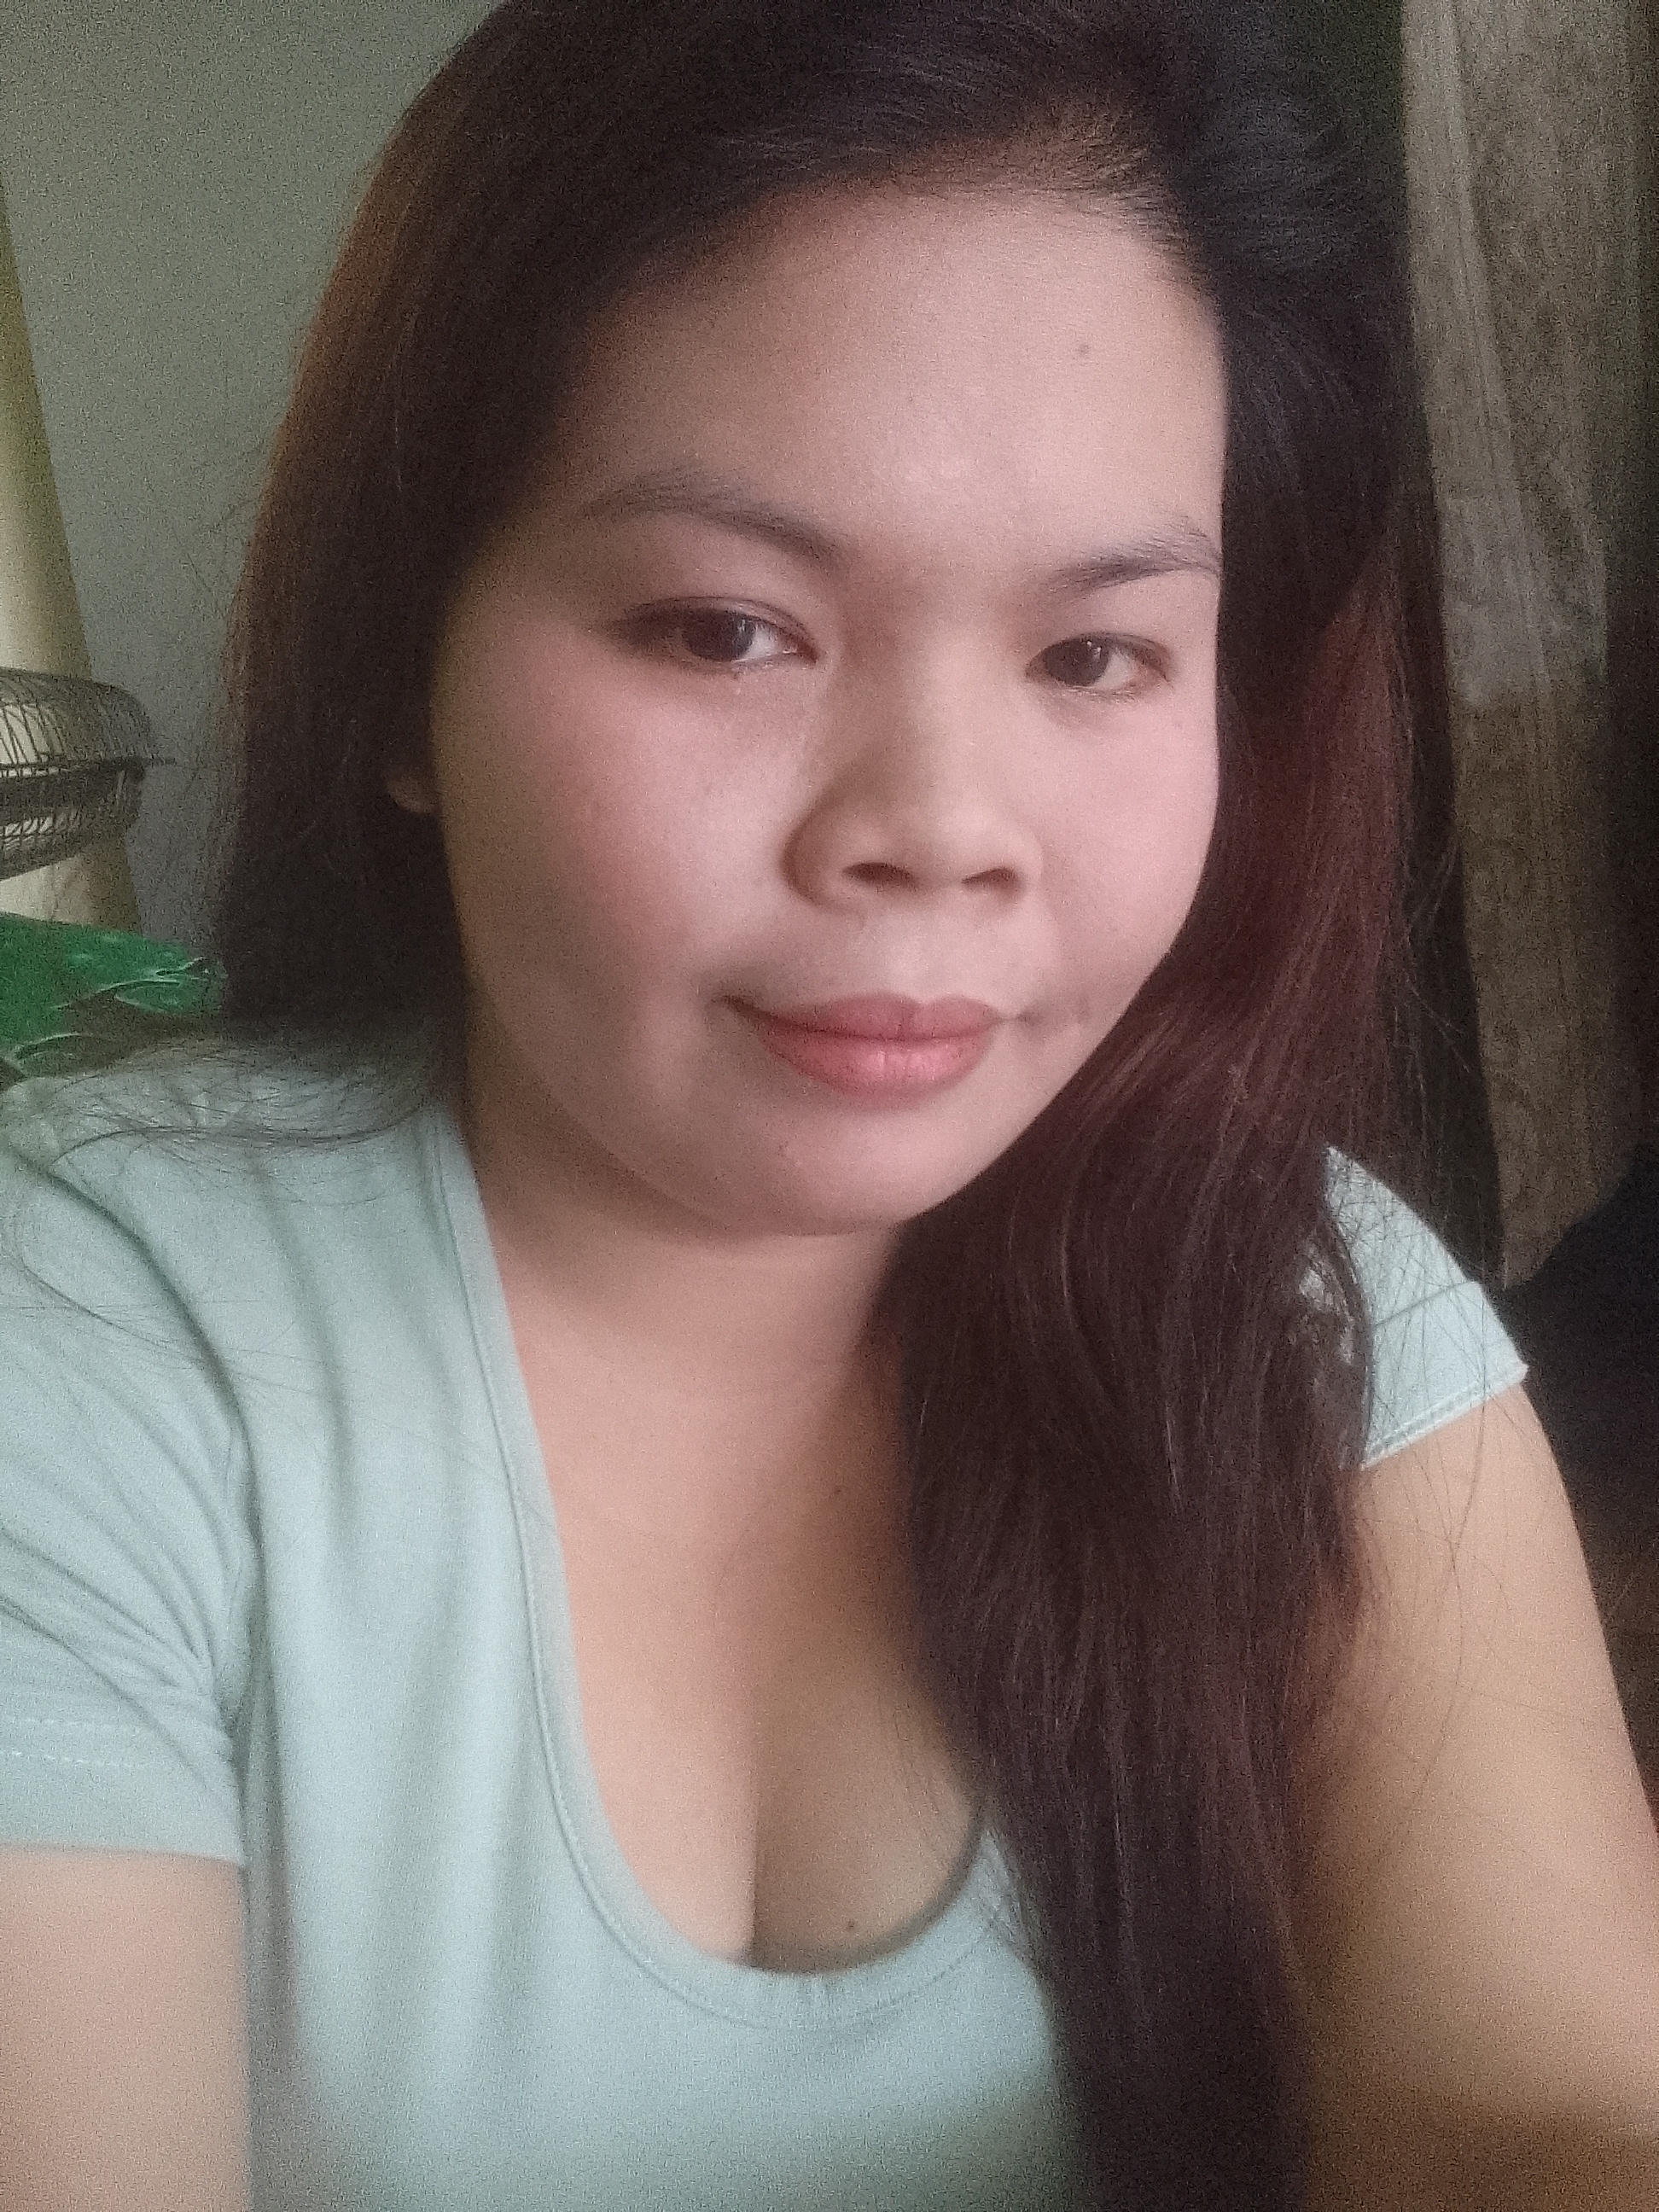  local dating sites Davao City